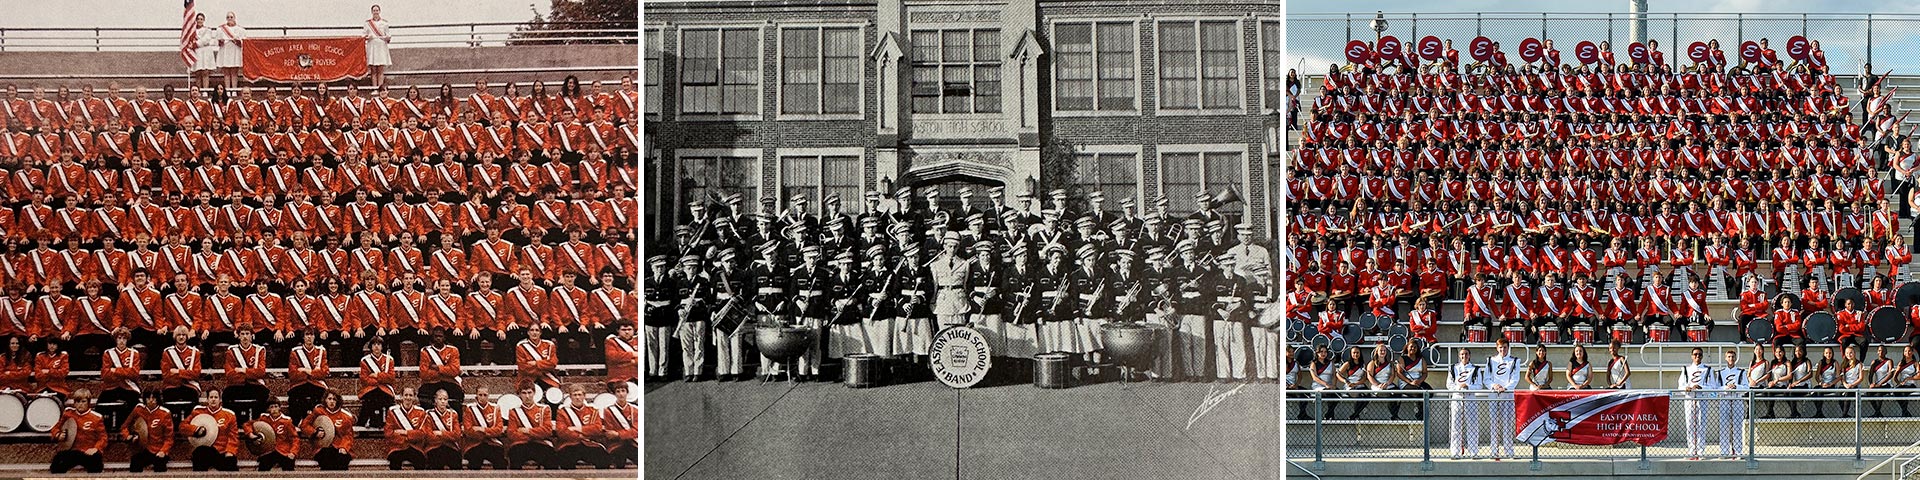 Three images of the Easton band over the last 100 years